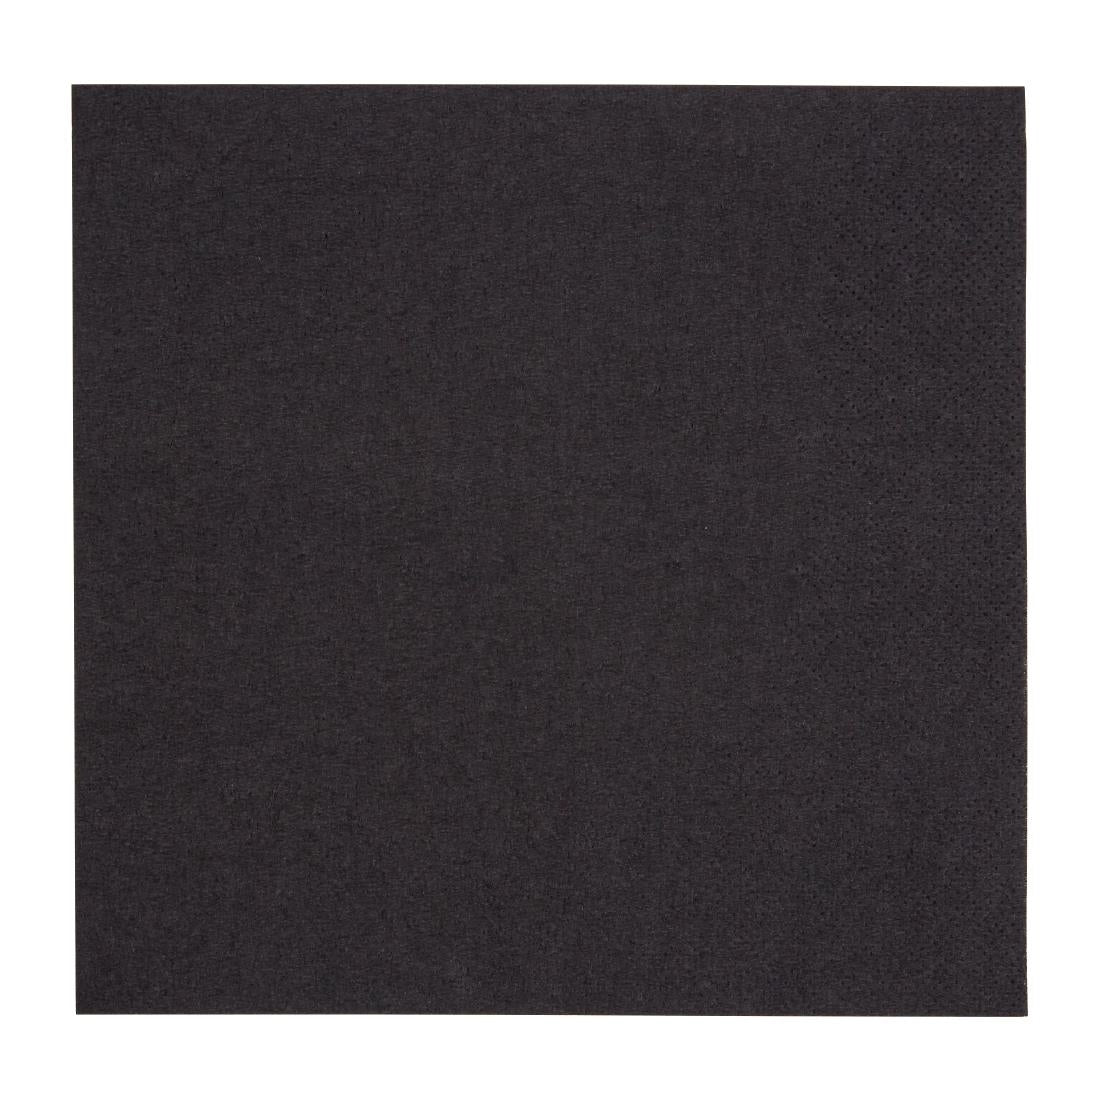 FE225 Fiesta Recyclable Lunch Napkin Black 33x33cm 2ply 1/4 Fold (Pack of 2000) JD Catering Equipment Solutions Ltd